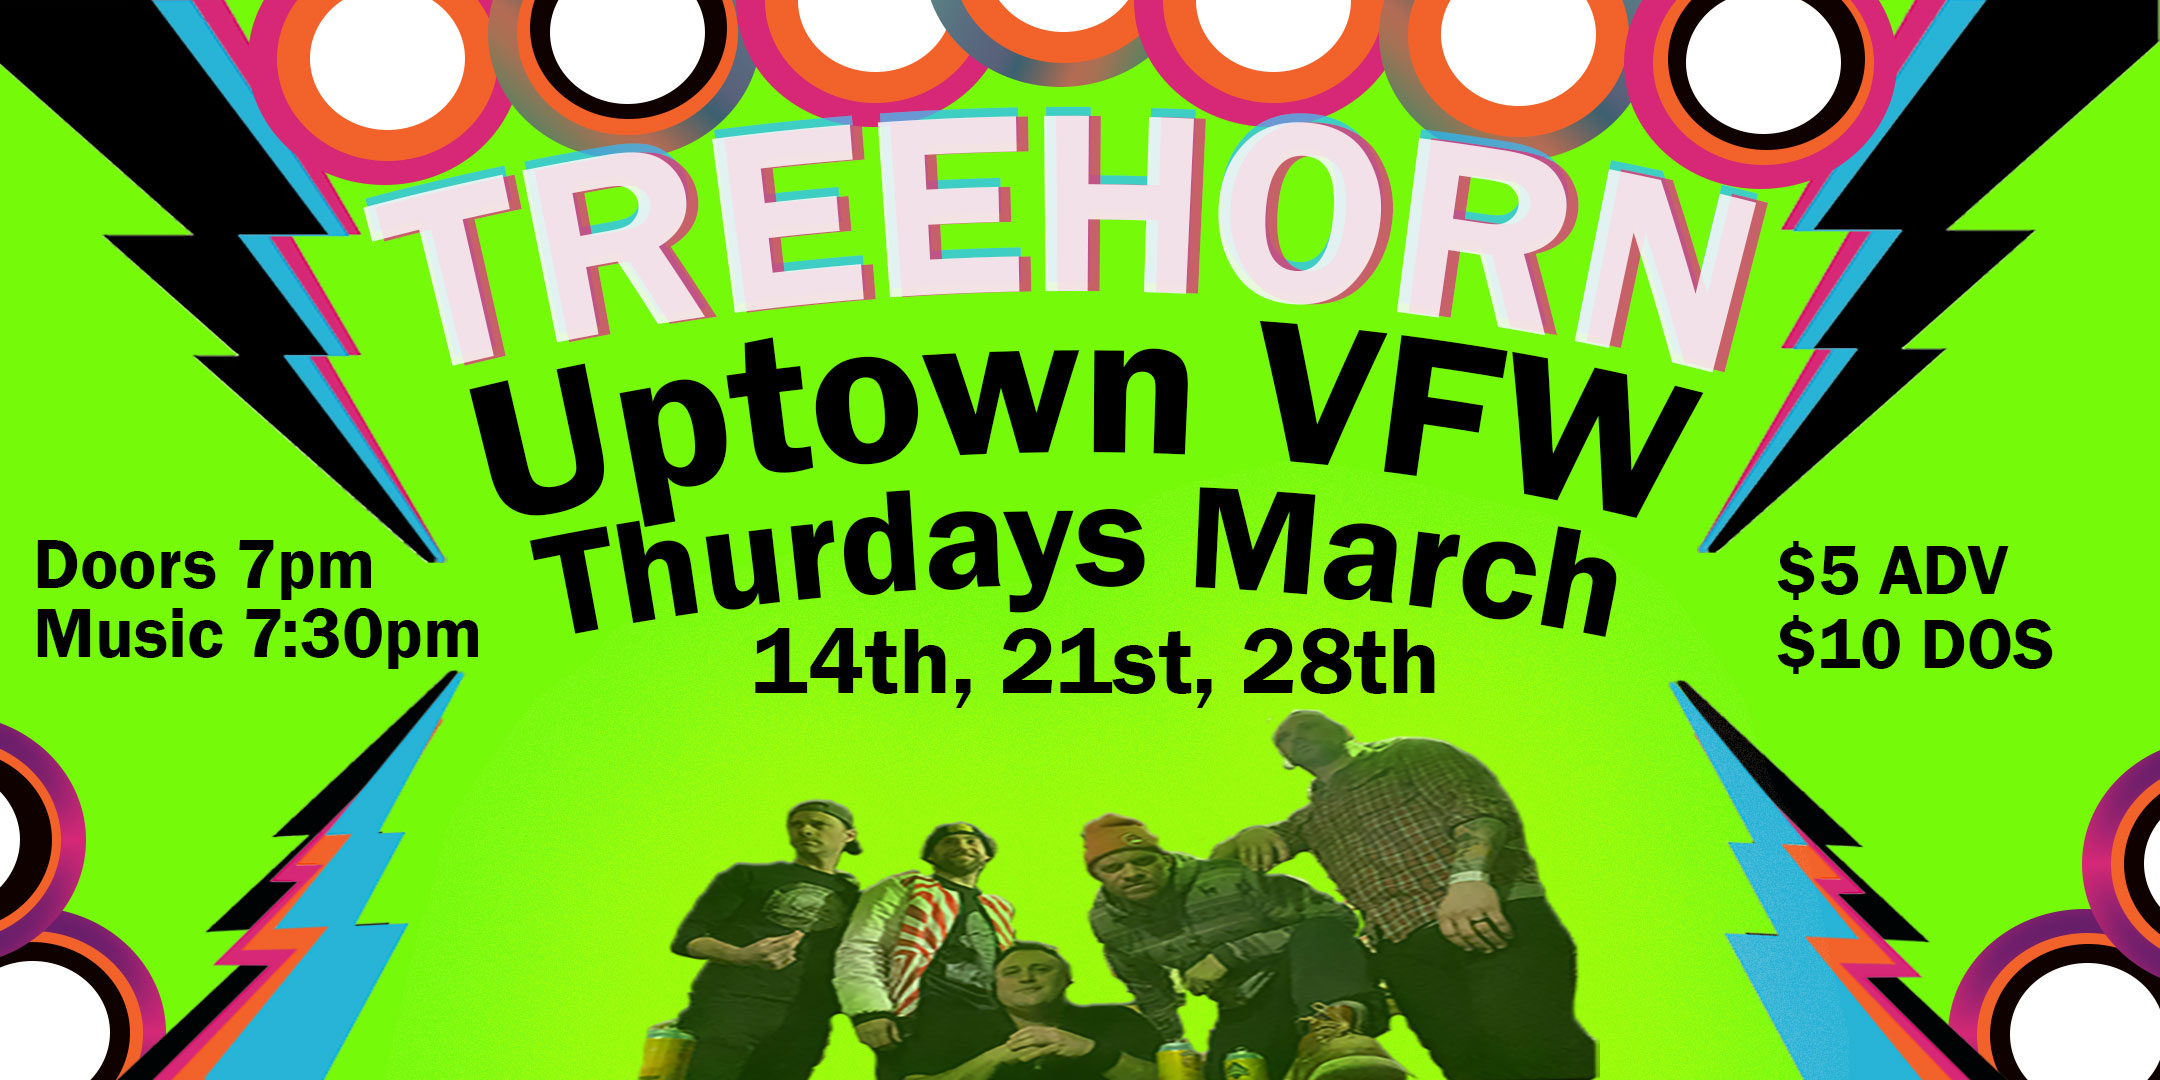 TREEHORN An Epic Night of '90s Rock Thursday March 21 James Ballentine "Uptown" VFW Post 246 2916 Lyndale Ave S Mpls Doors 7:00pm :: Music 7:30pm :: 21+ GA: $5 ADV / $10 DOS